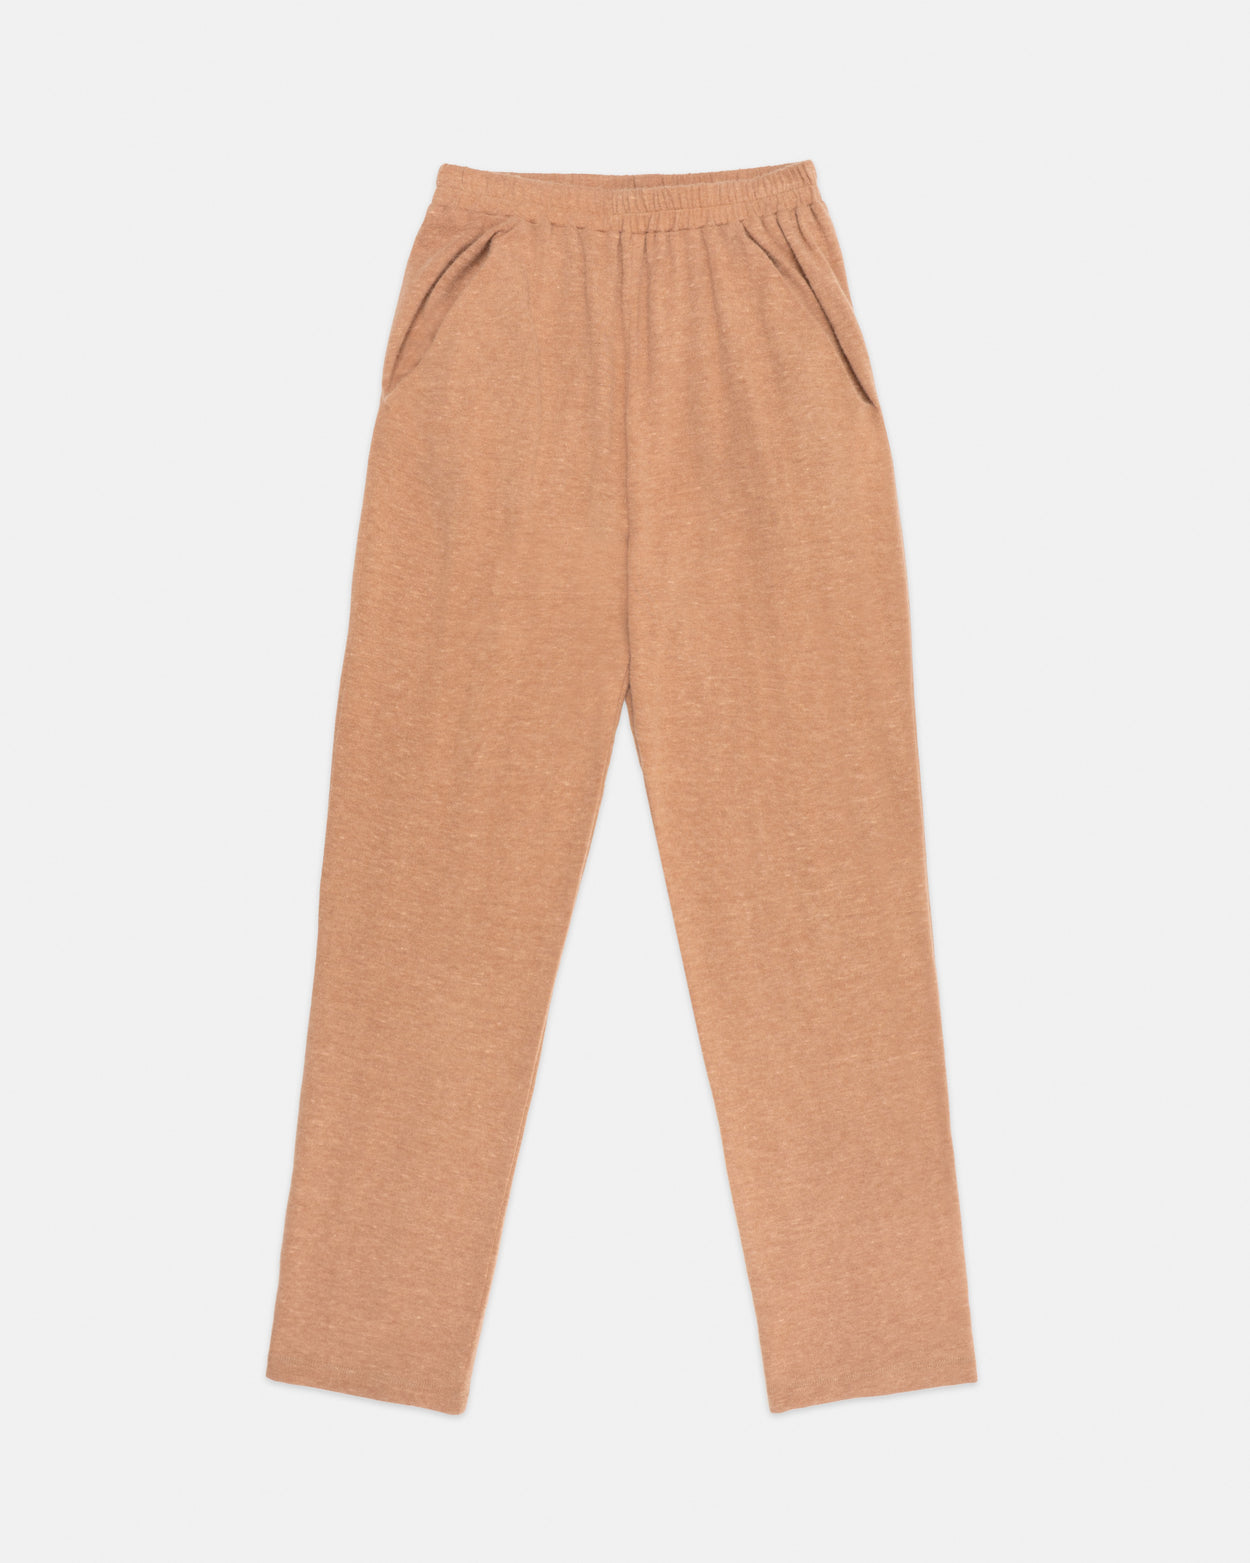 The Camel Cosy Pants